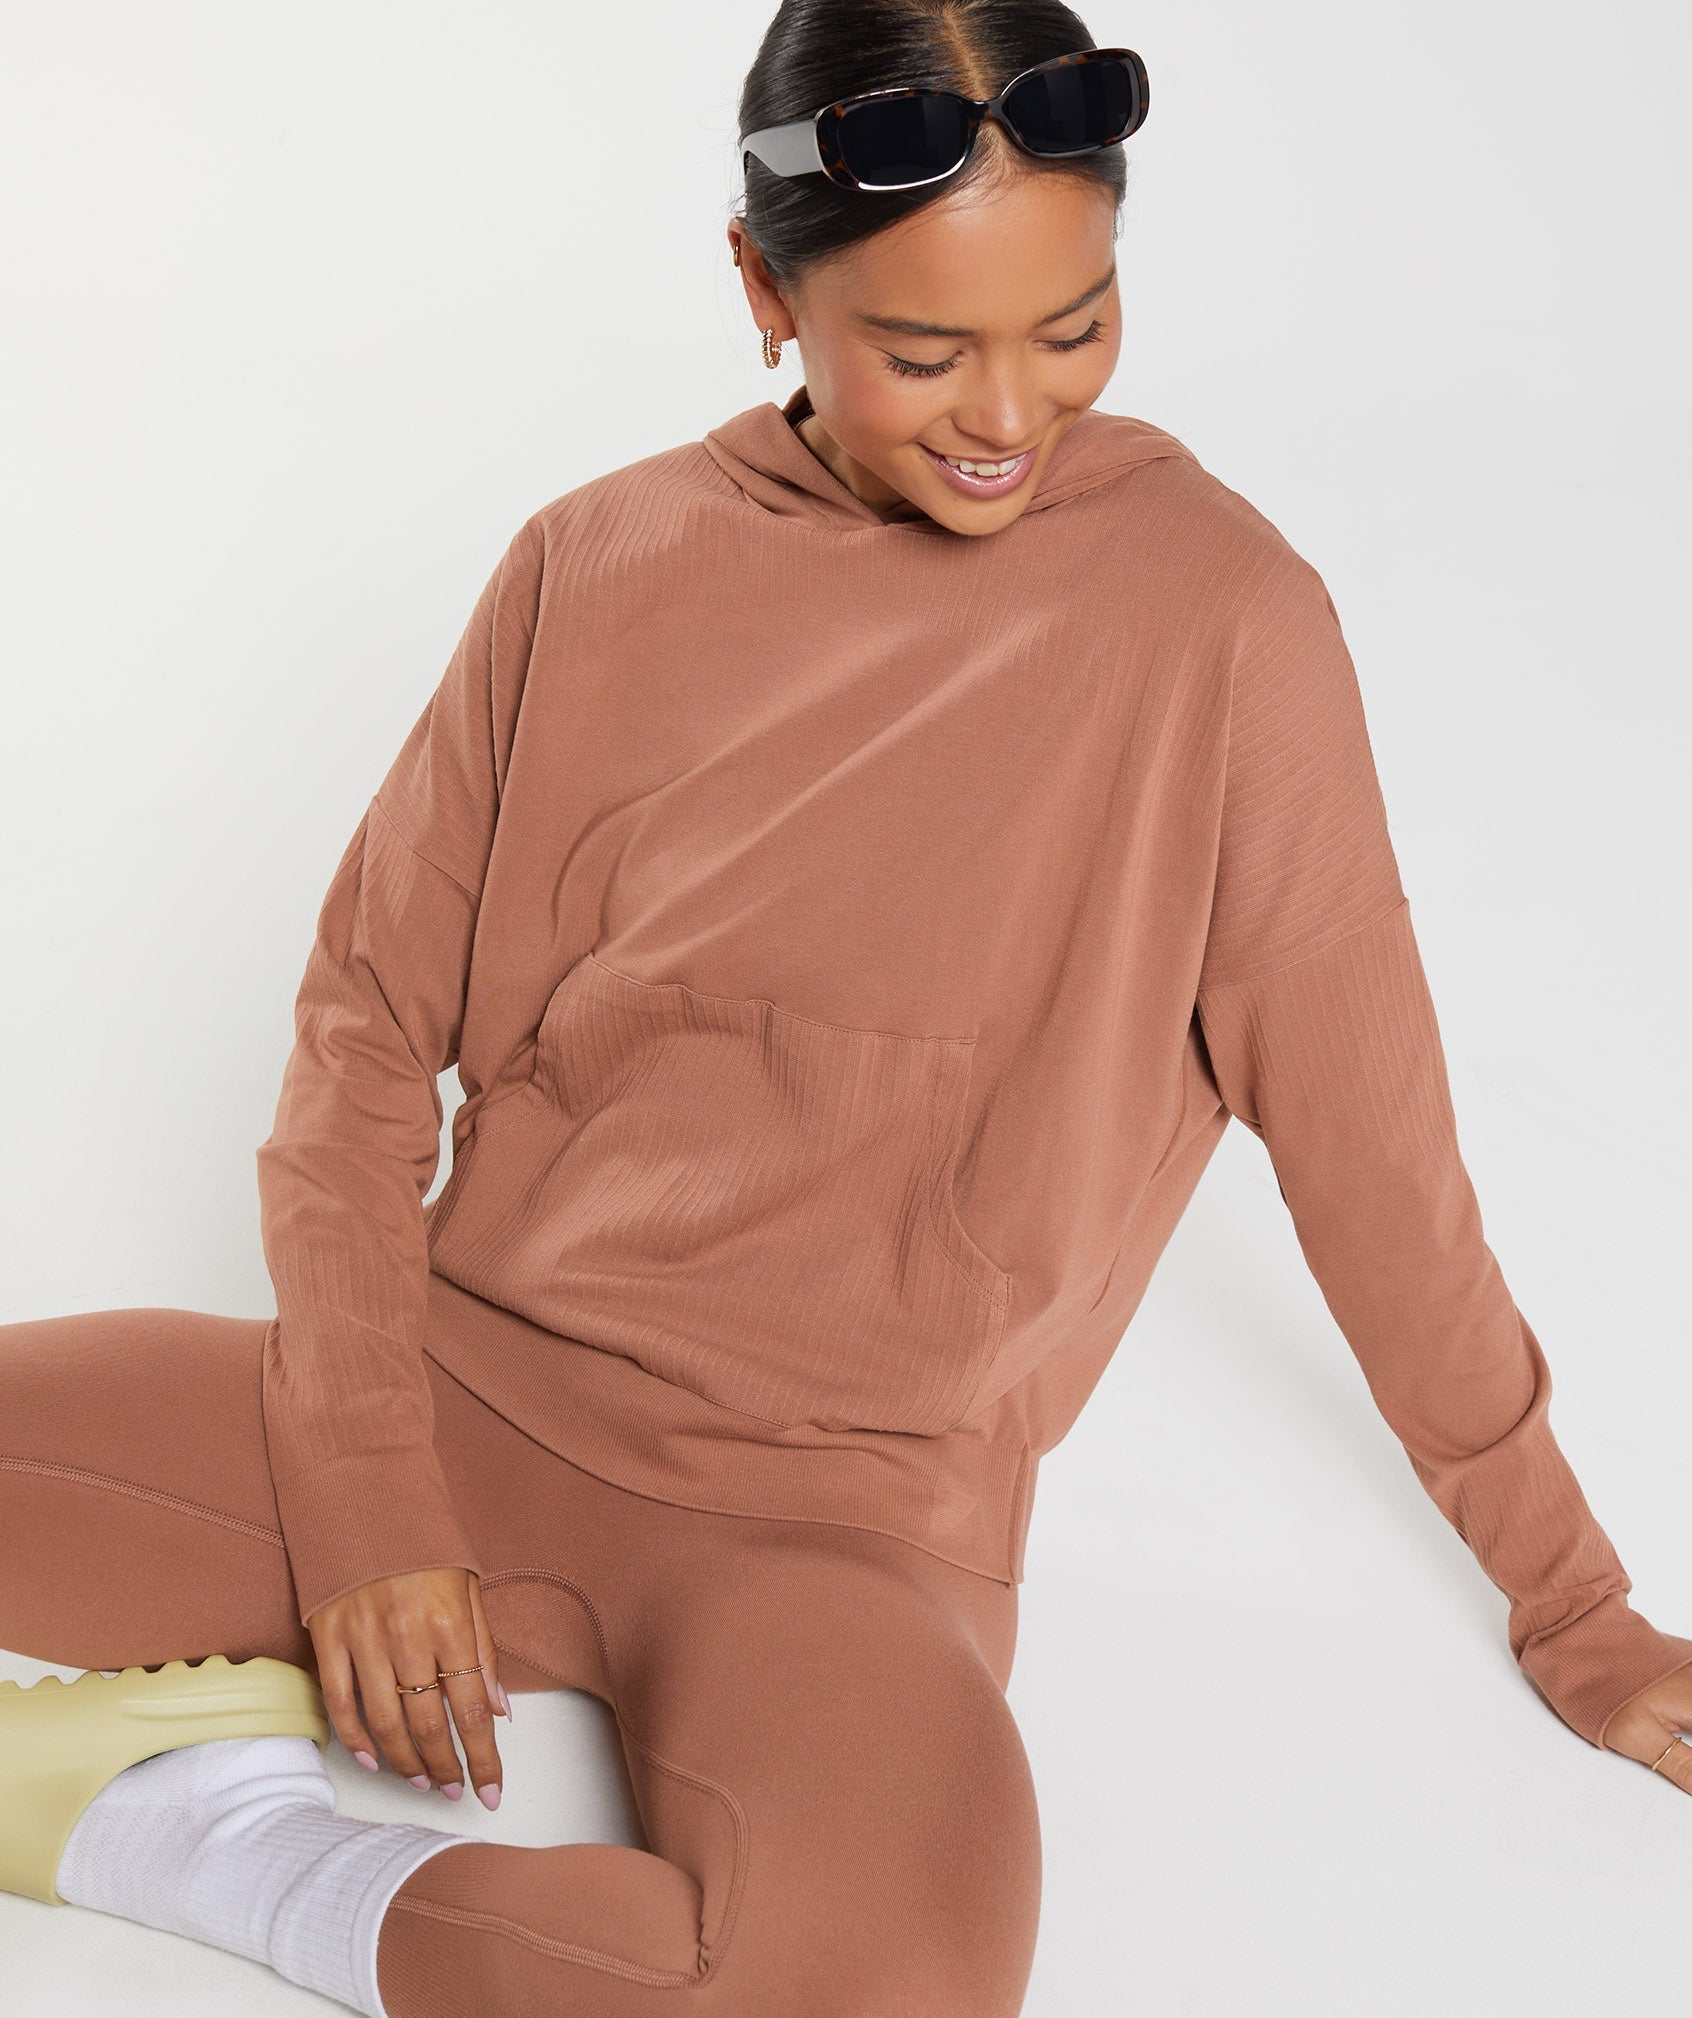 Rest Day Lounge Hoodie in Coffee Brown